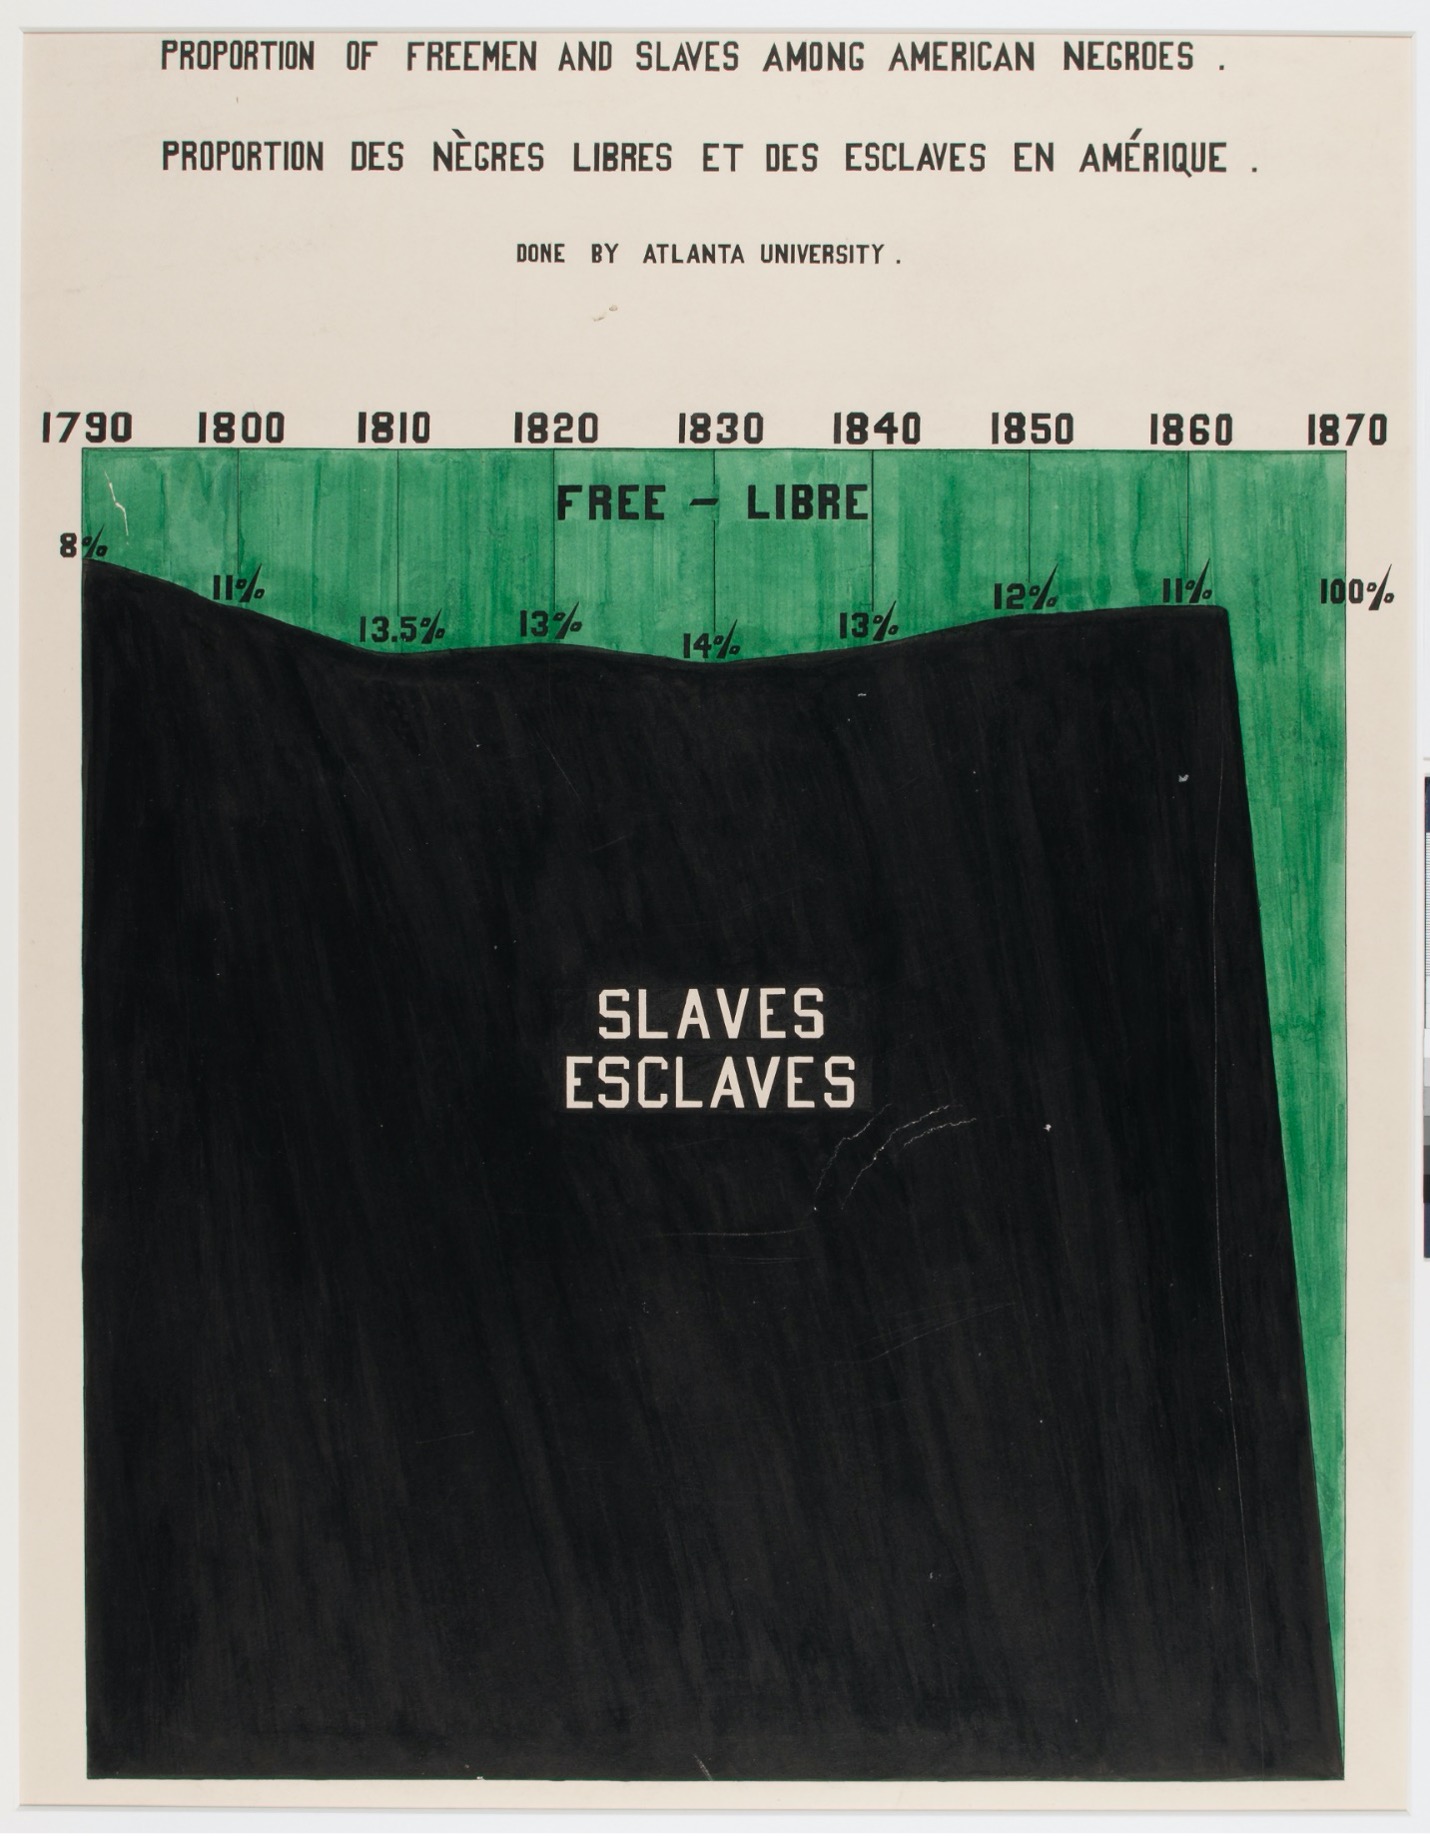 Stacked area chart where proportion of free versus enslaved Black Americans is presented from 11790 to 1870. Only 8-14% of Black Americans were free every year until 1870, when they were all free.